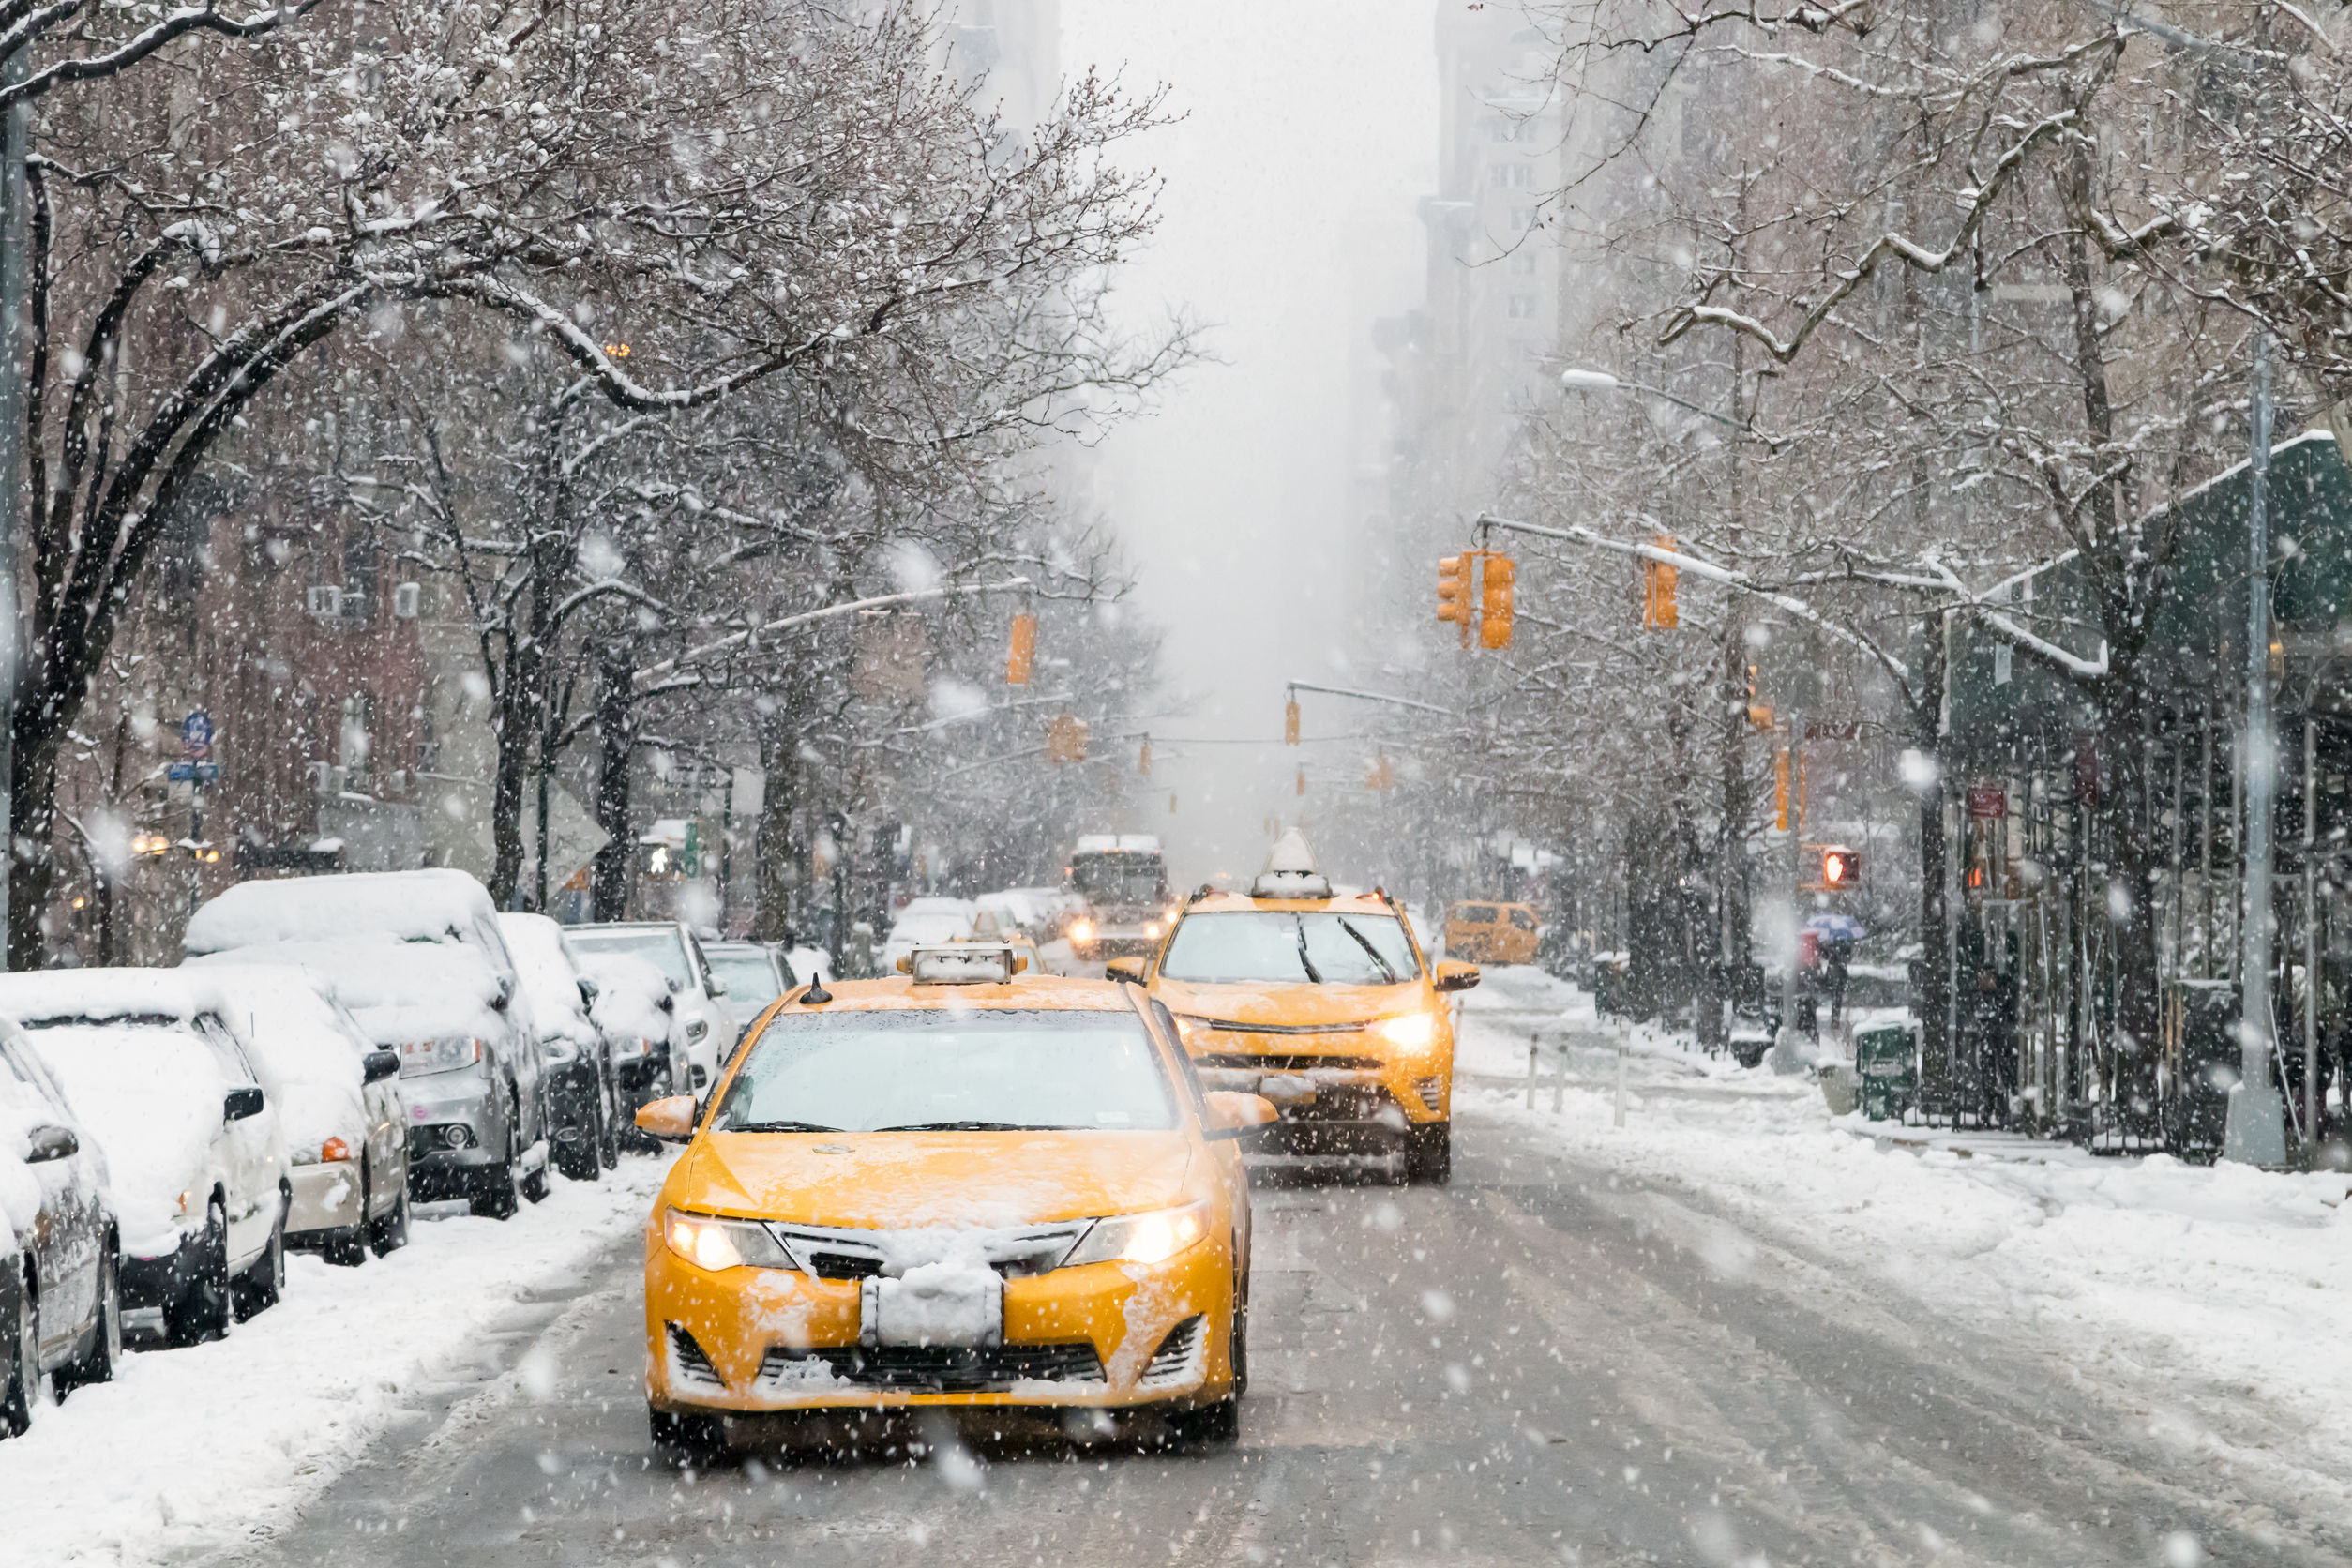 Remember, ADHD treatment in NYC is available if winter weather is getting you down